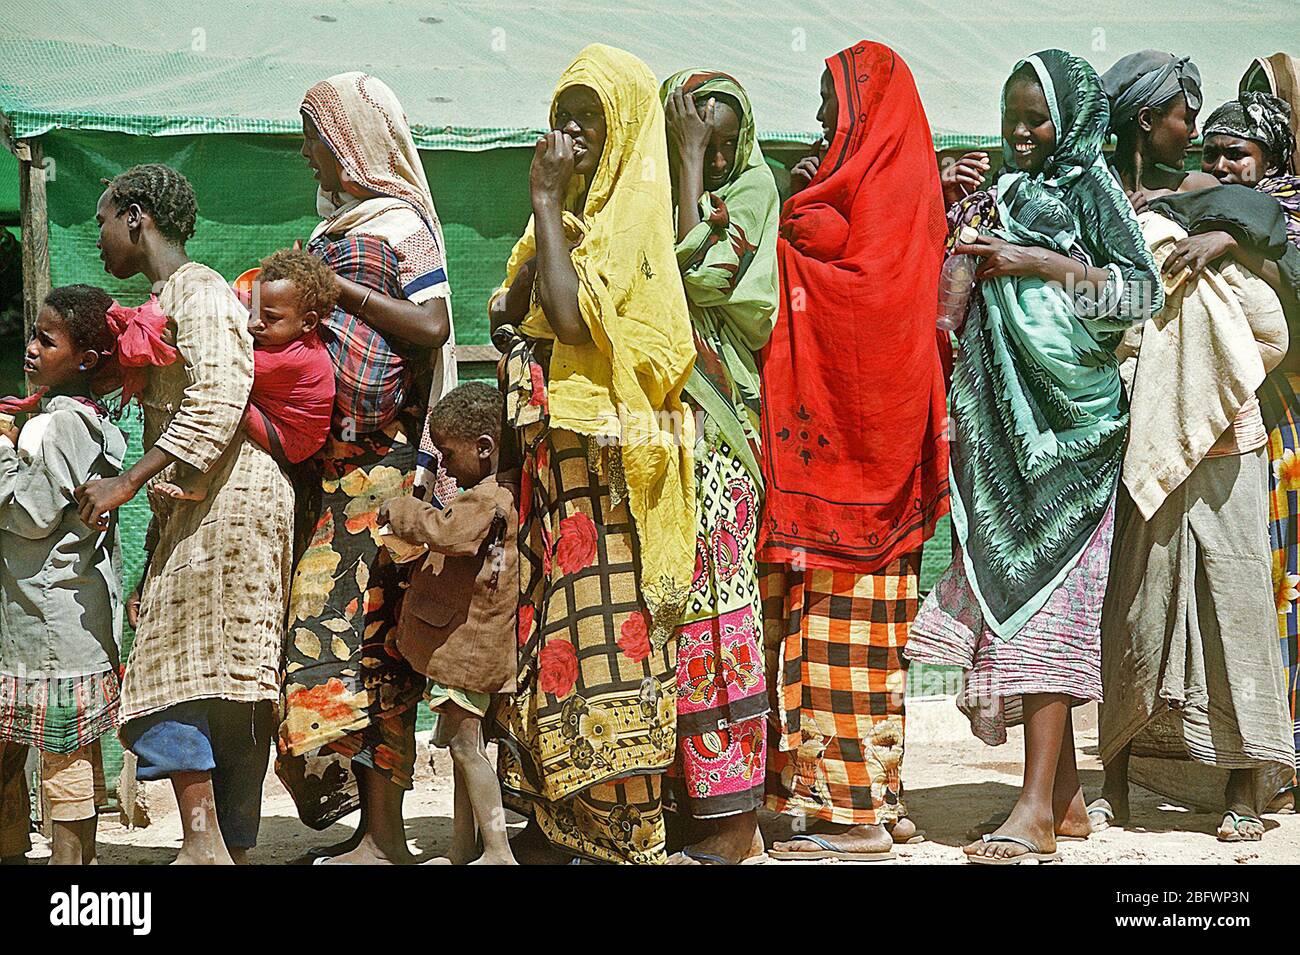 1993 -Somali women and children line up at an aid station during the multinational relief effort Operation Restore Hope. Stock Photo